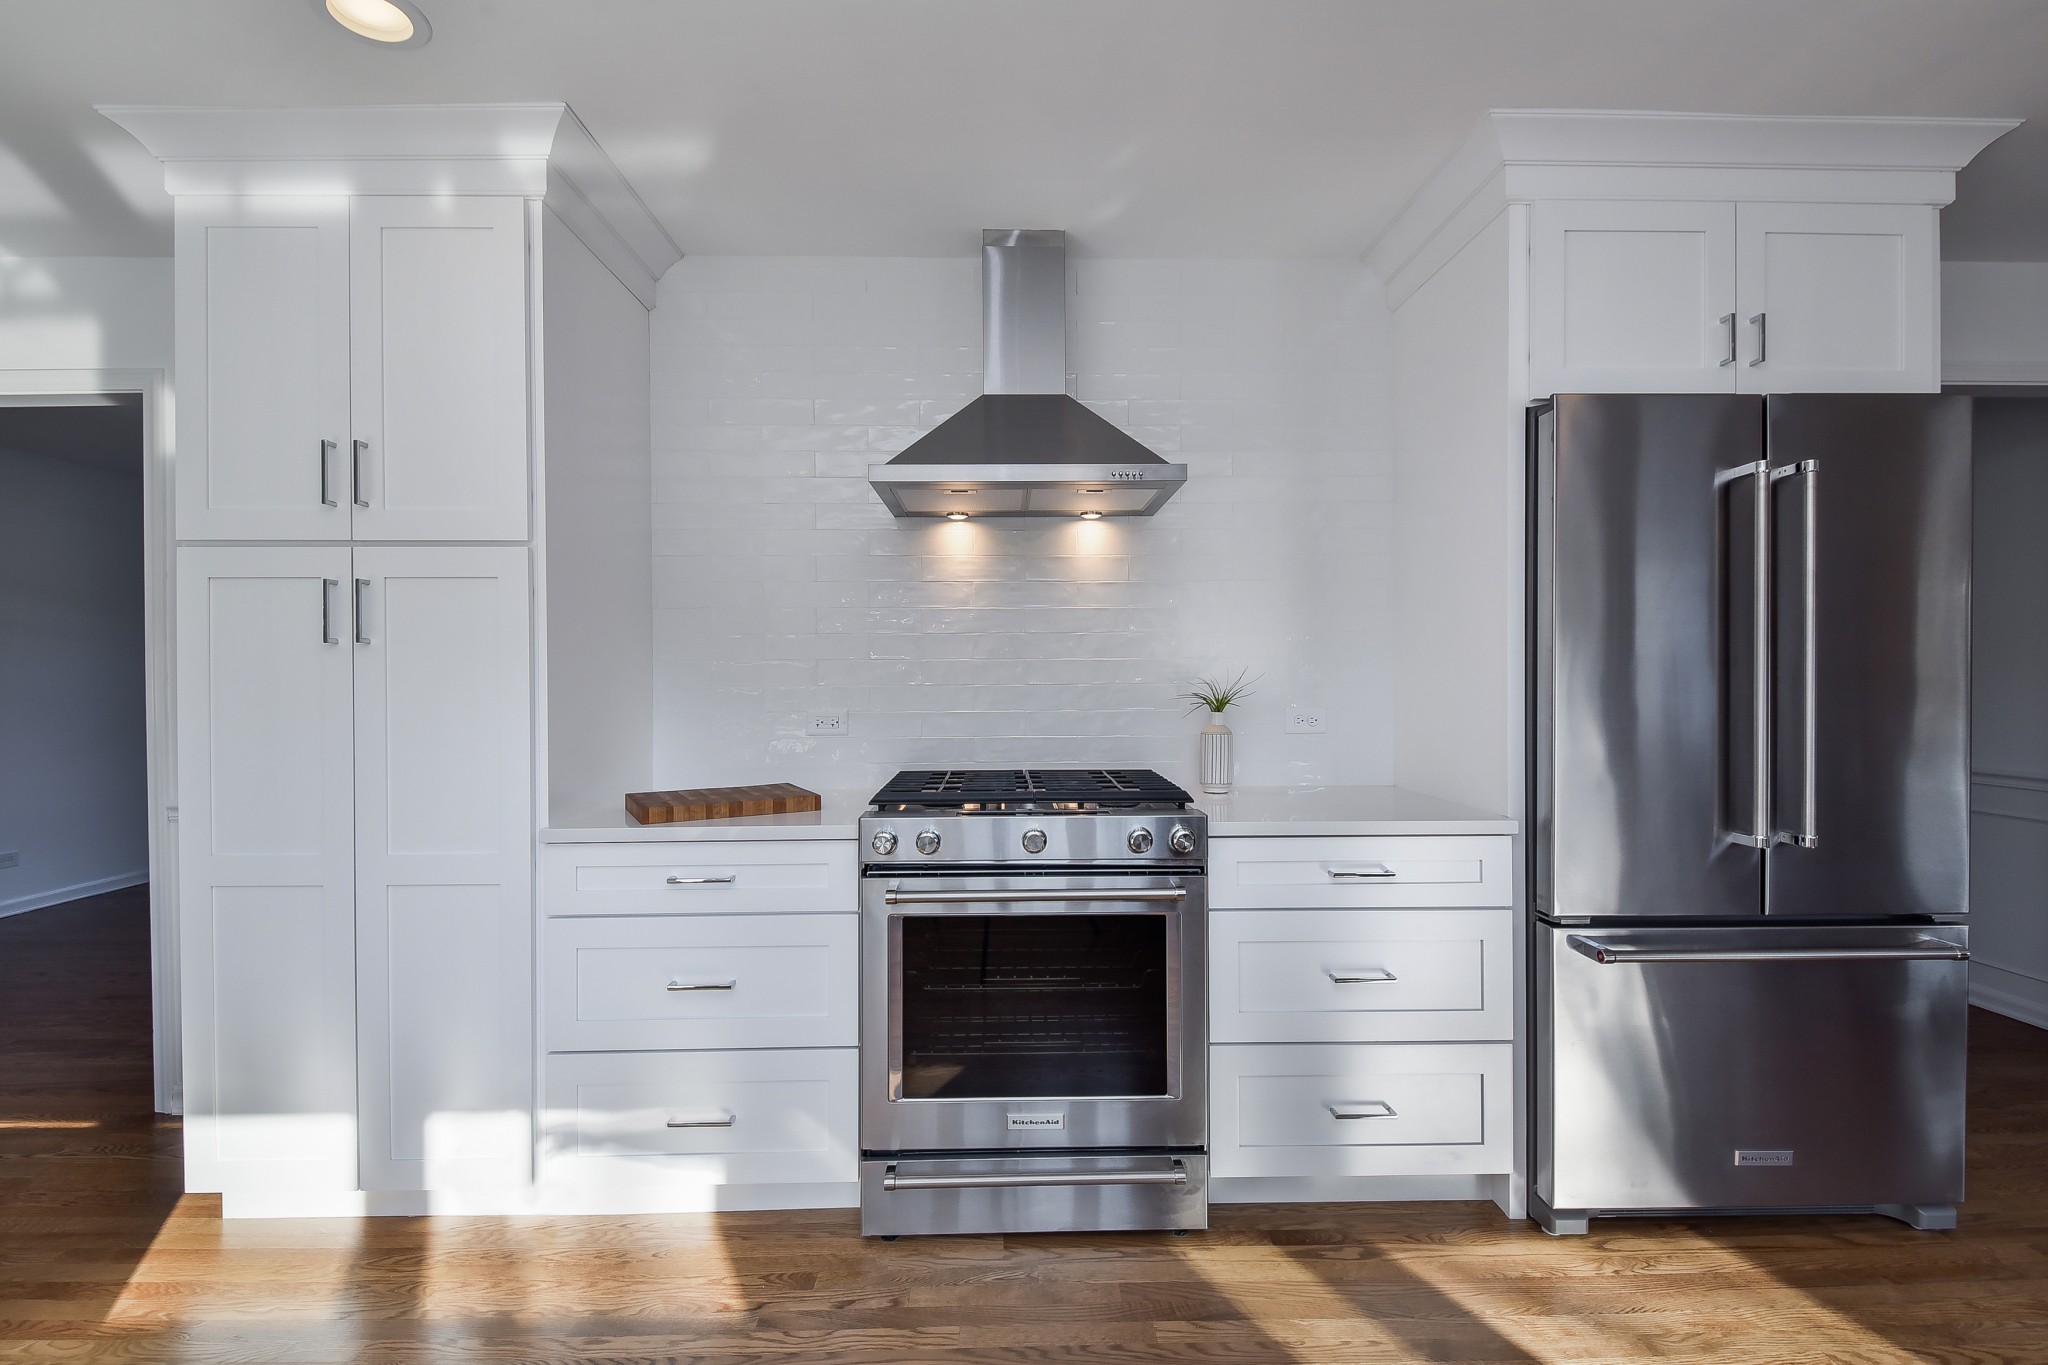 5 Reasons HighEnd Appliances Are Worth Every Penny